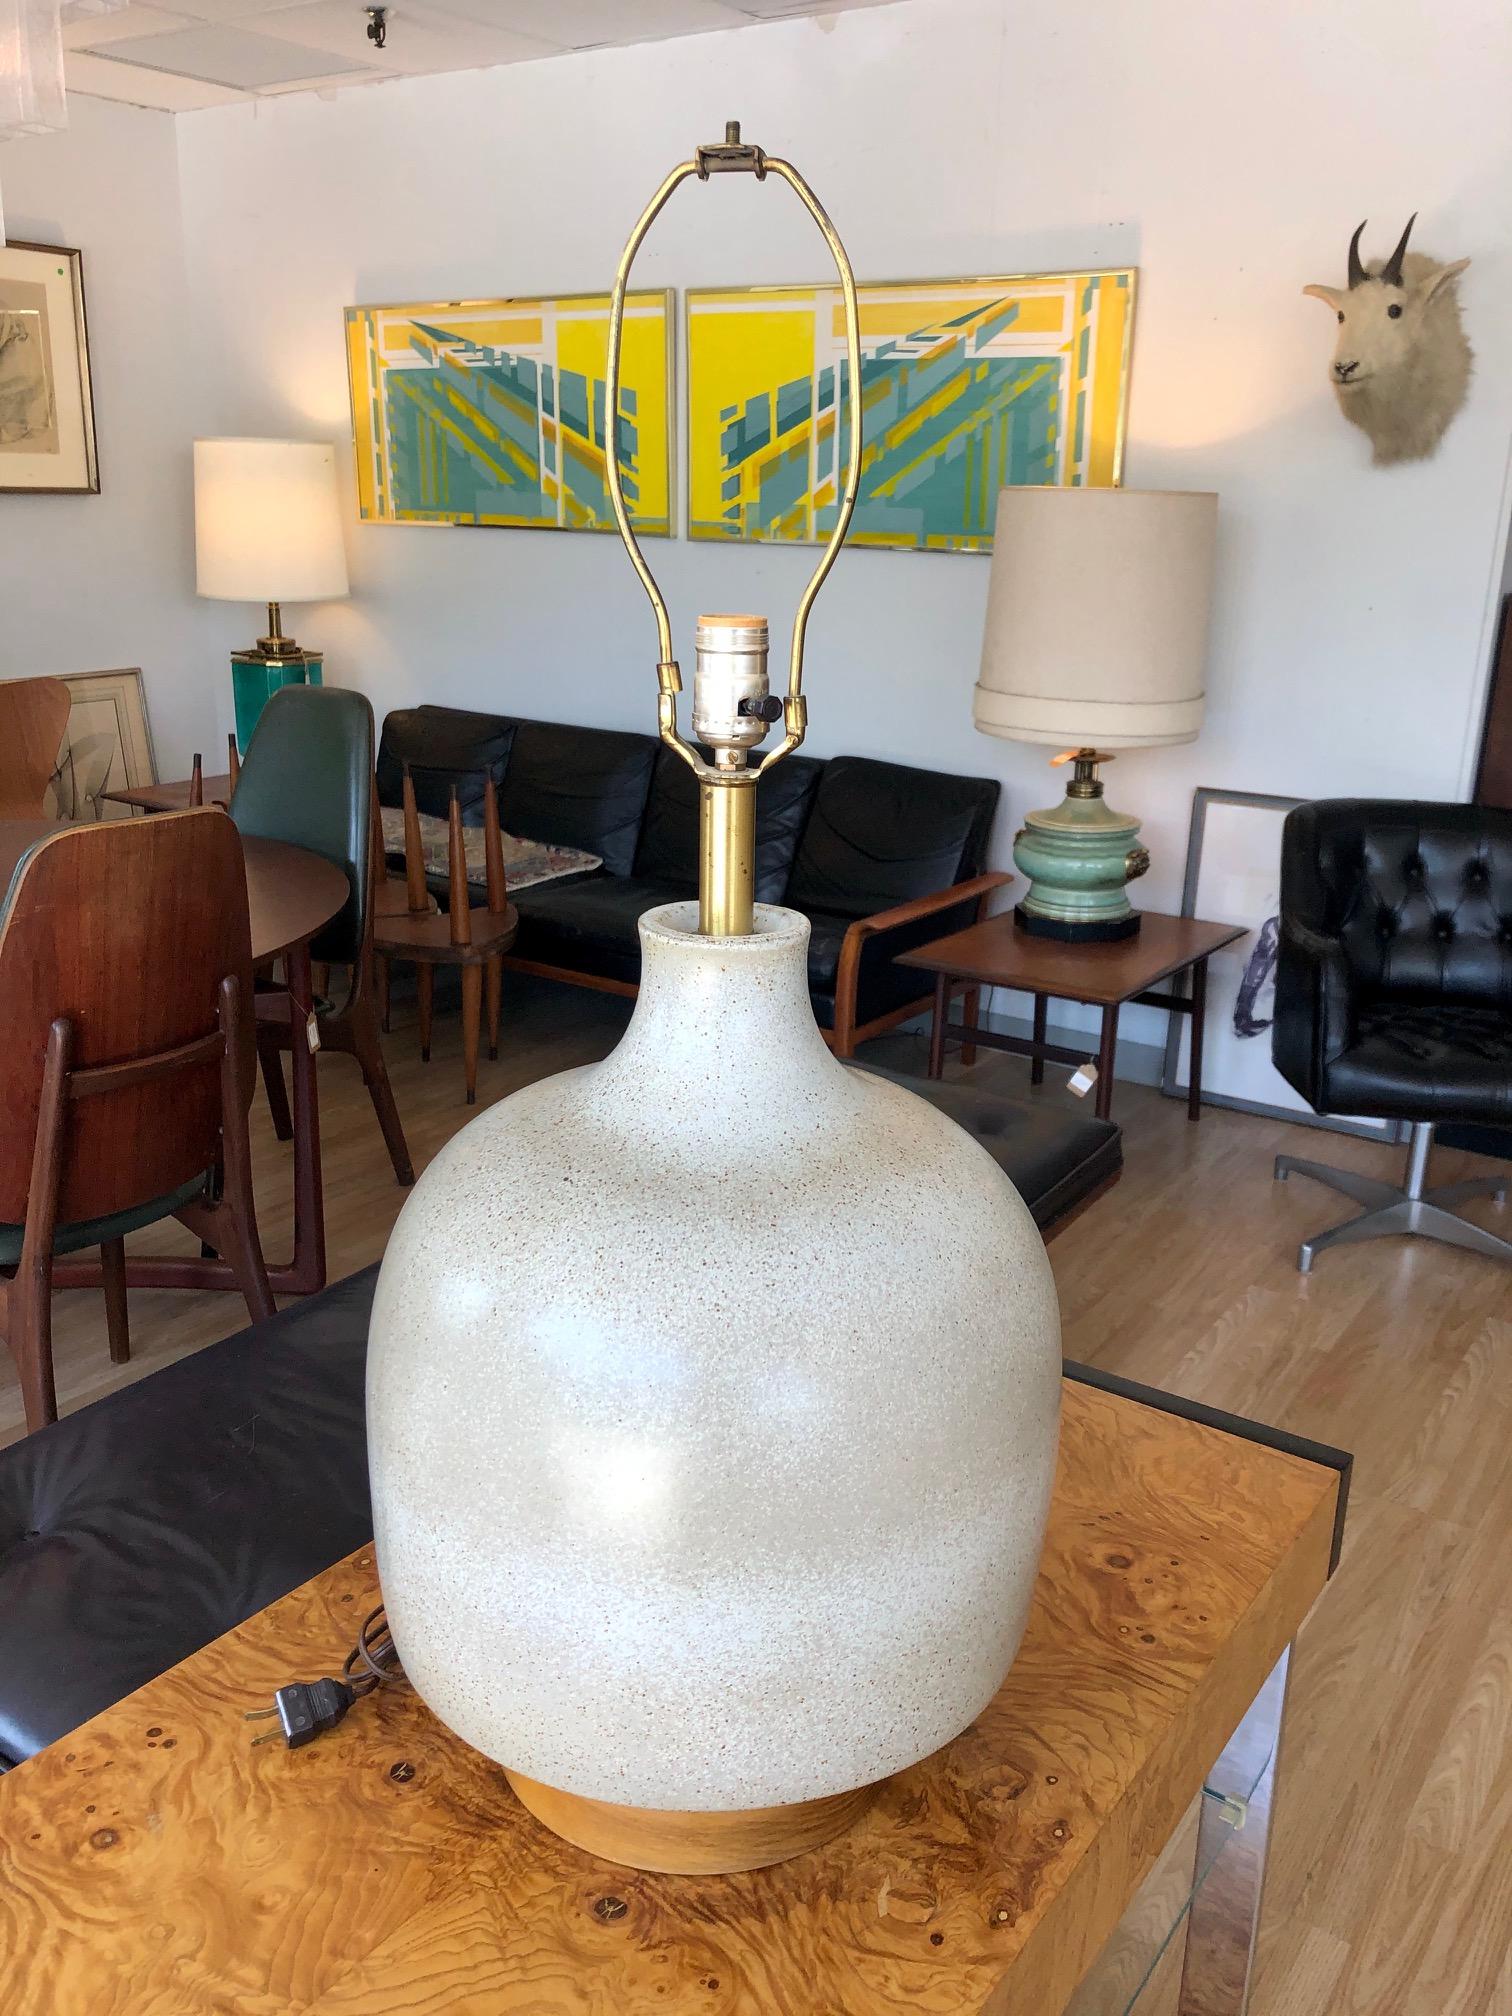 This vintage ceramic lamp by David Cressey is in overall good condition. Light blue with brown speckling. See photos.
circa 1950s. USA.
Dimensions:
30.5